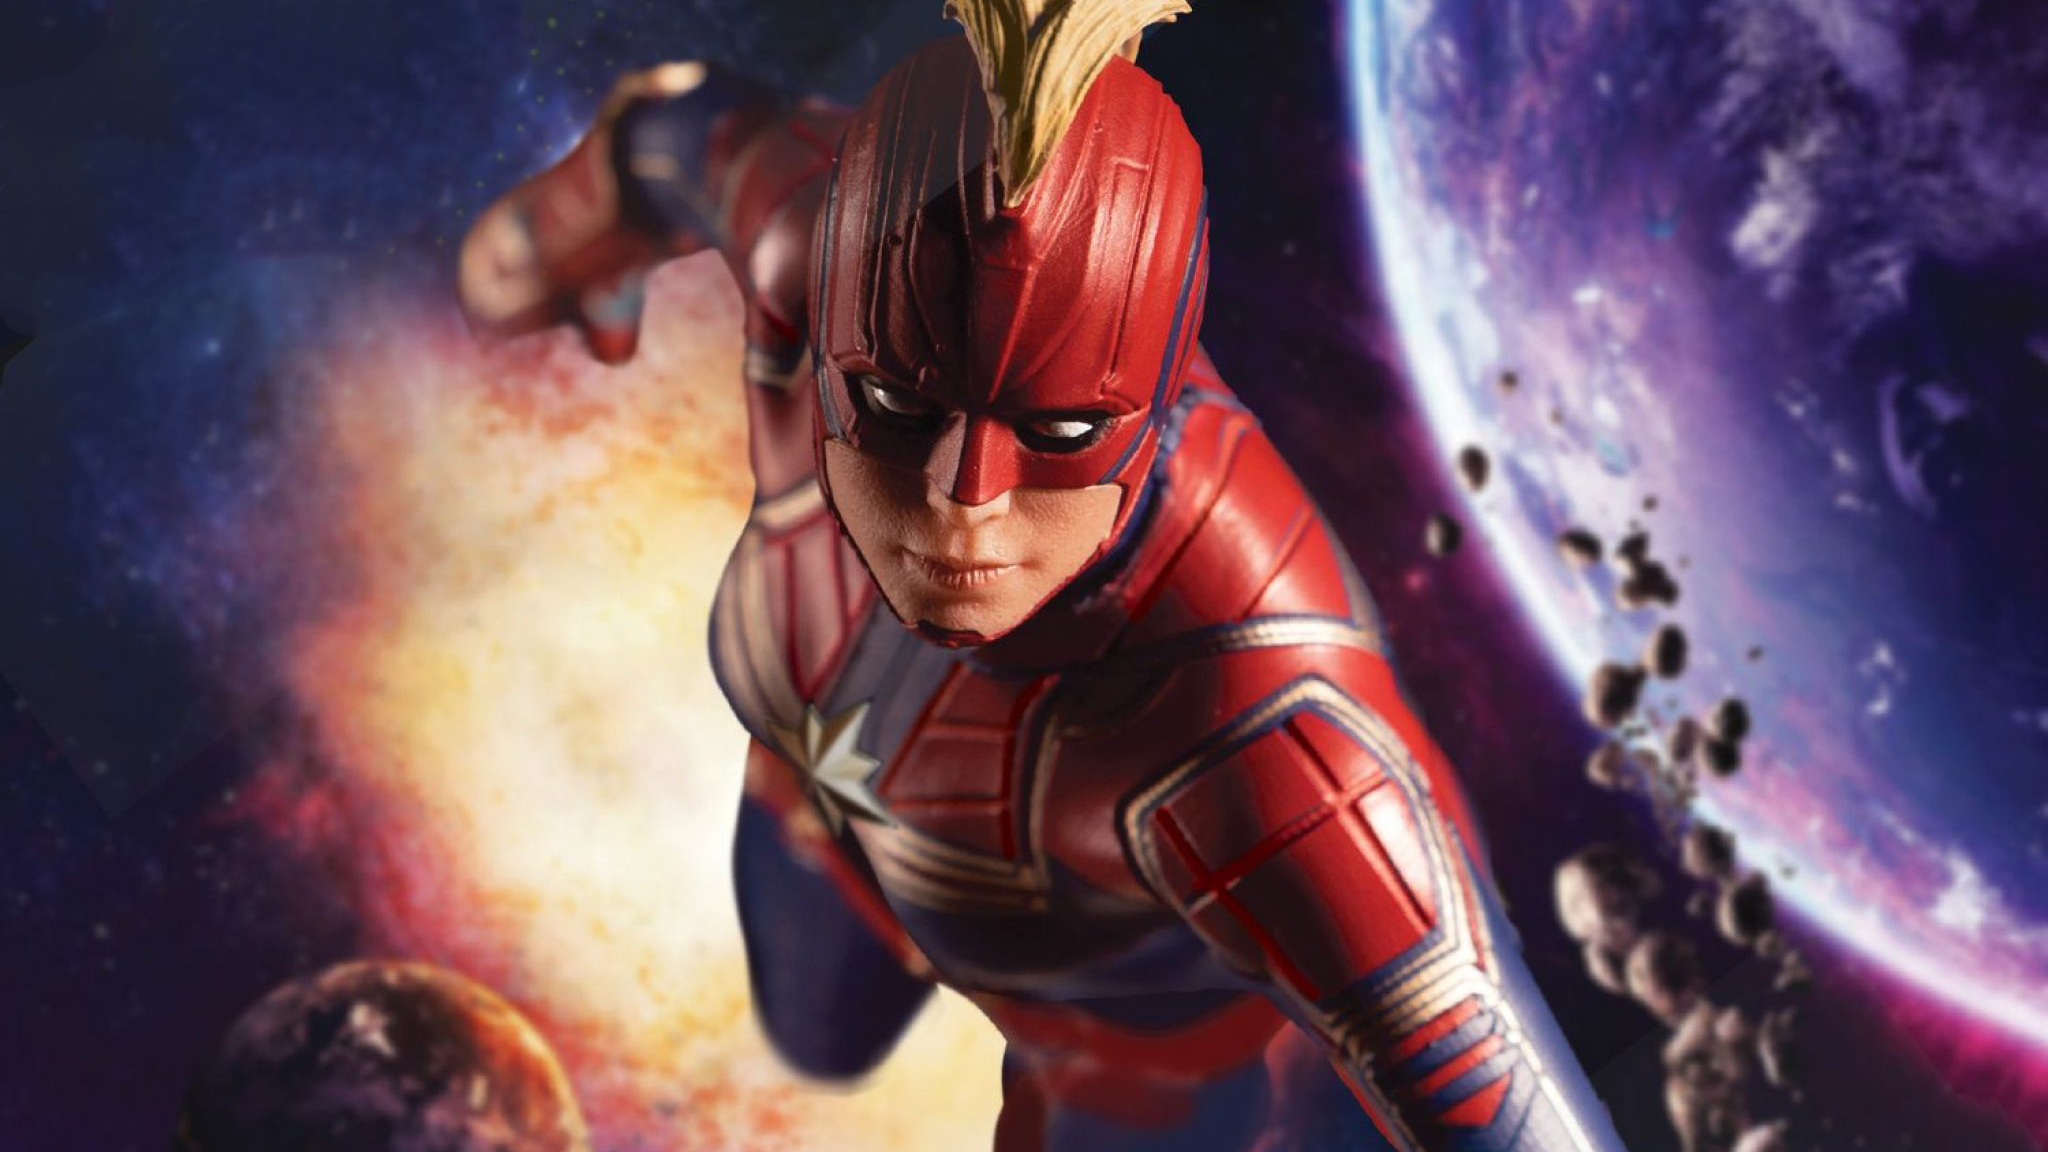 download the new Captain Marvel